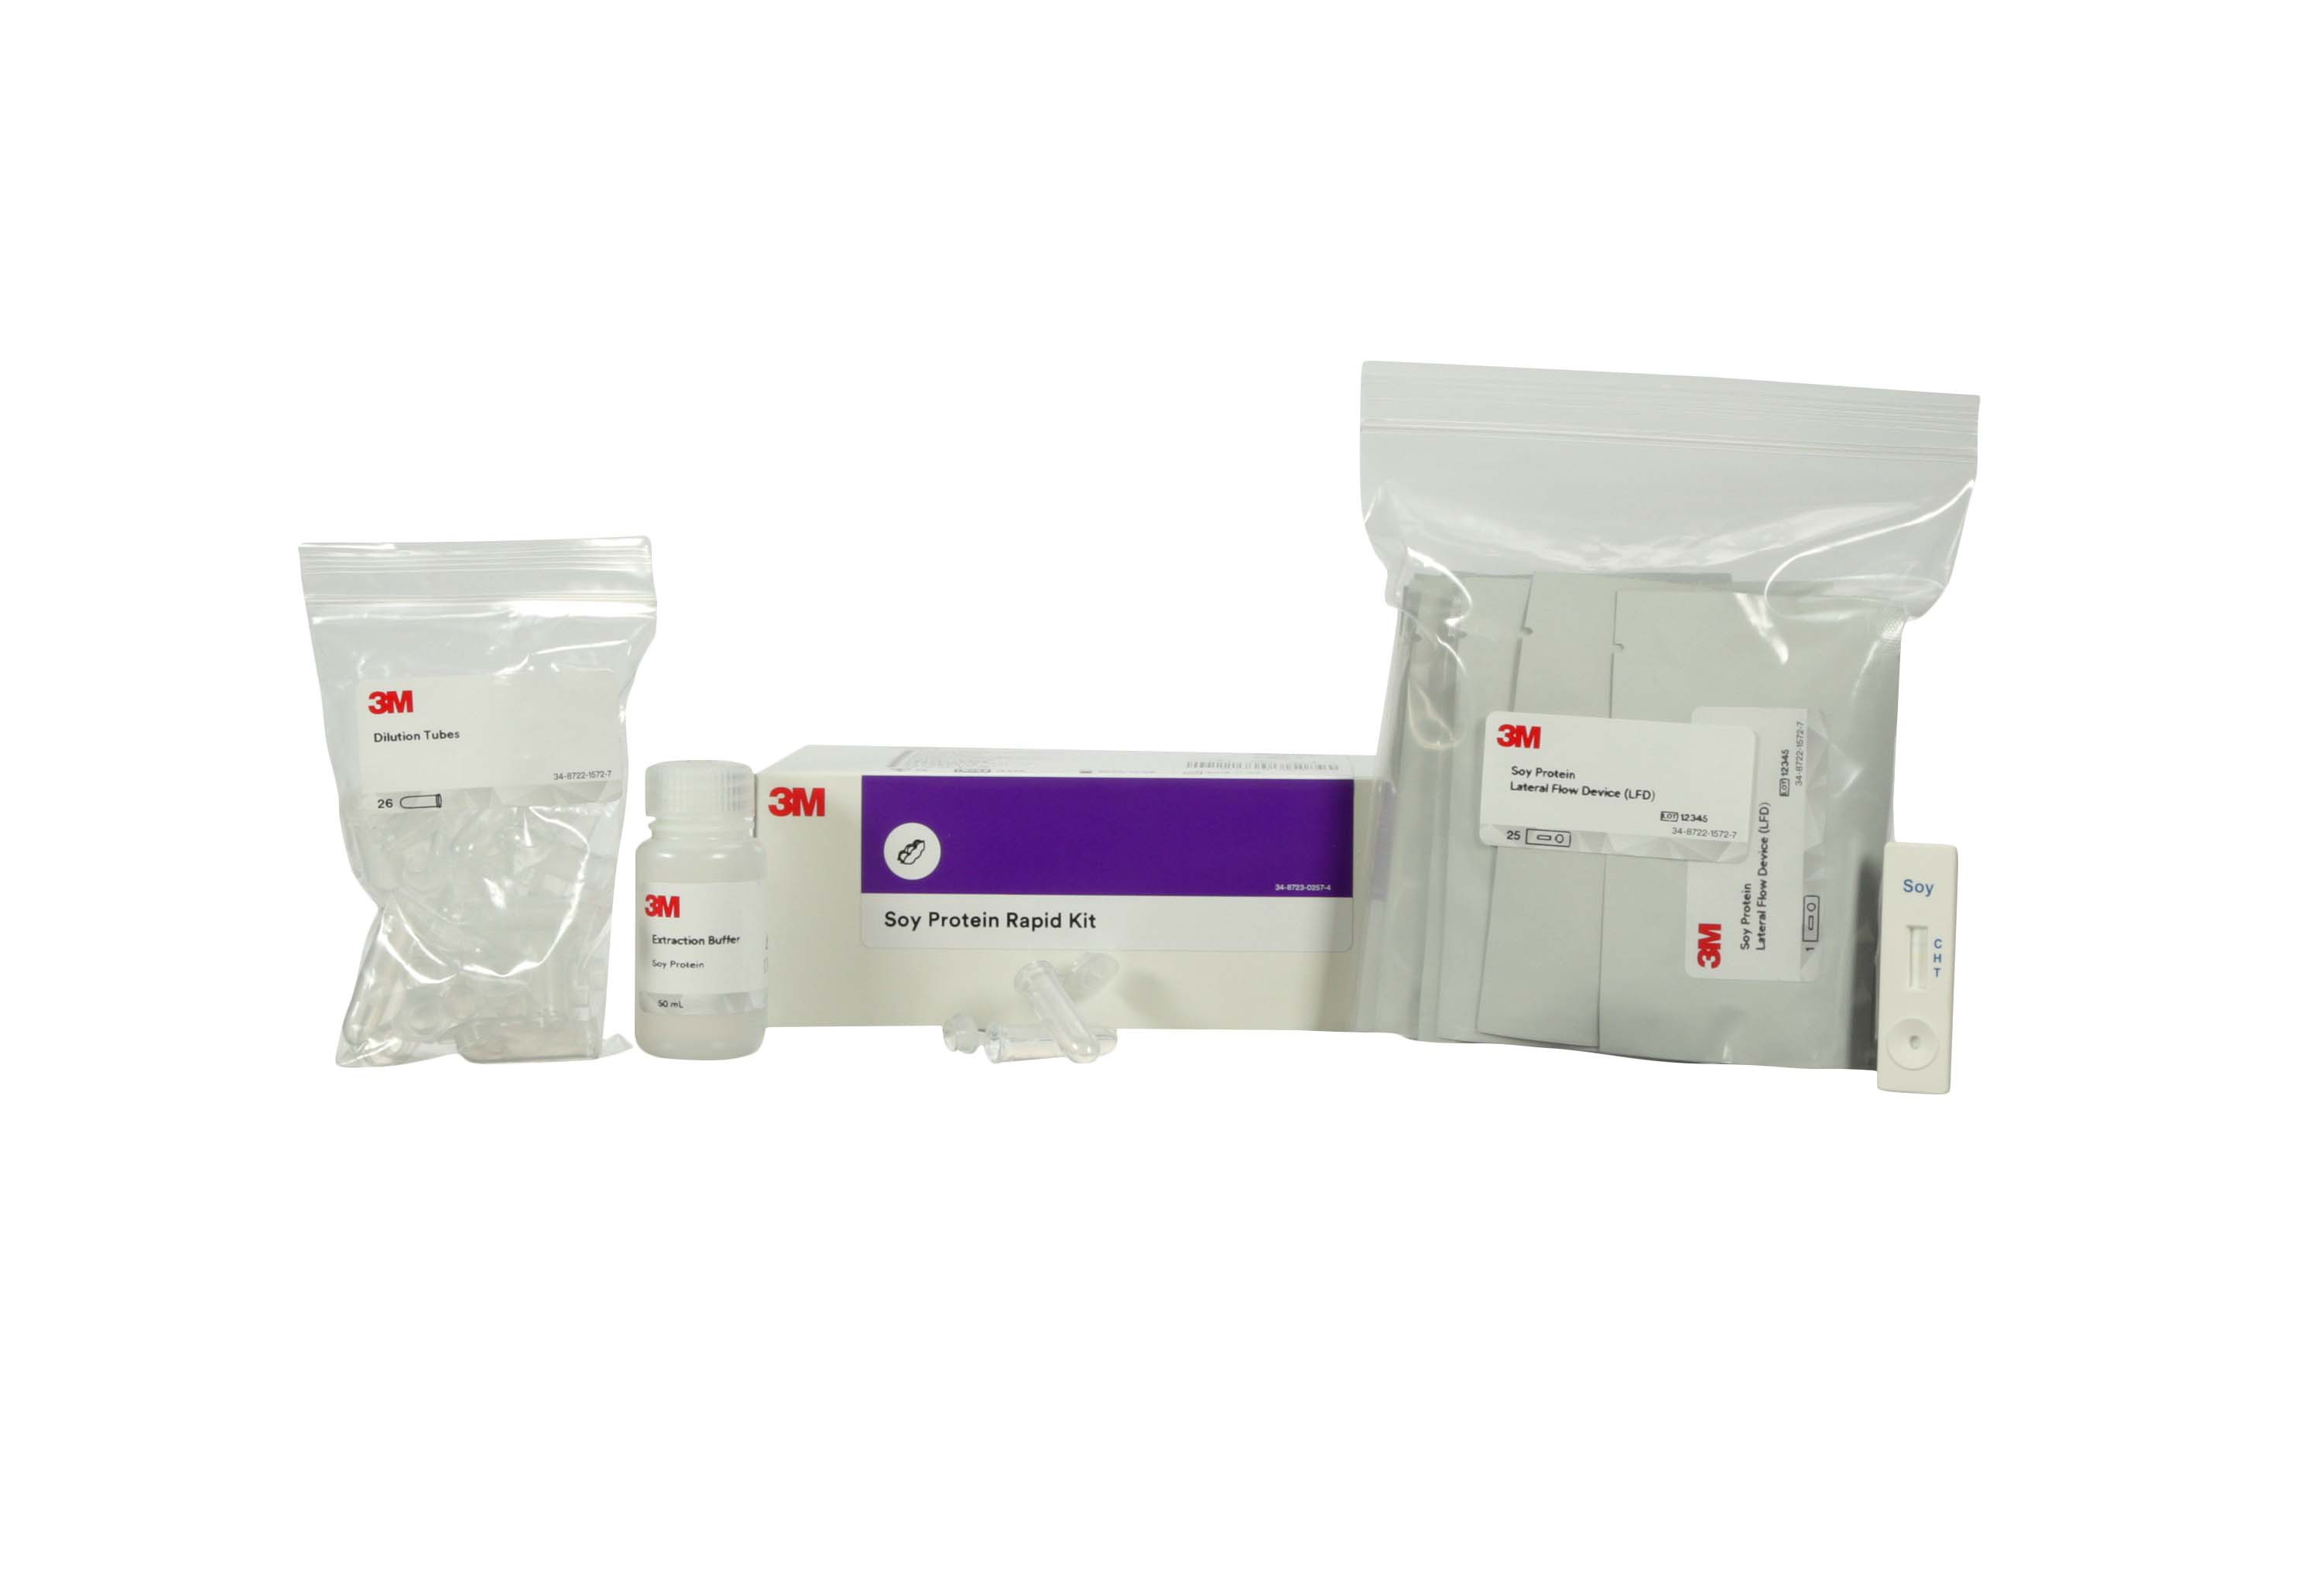 3M™ Soy Protein Rapid Kit